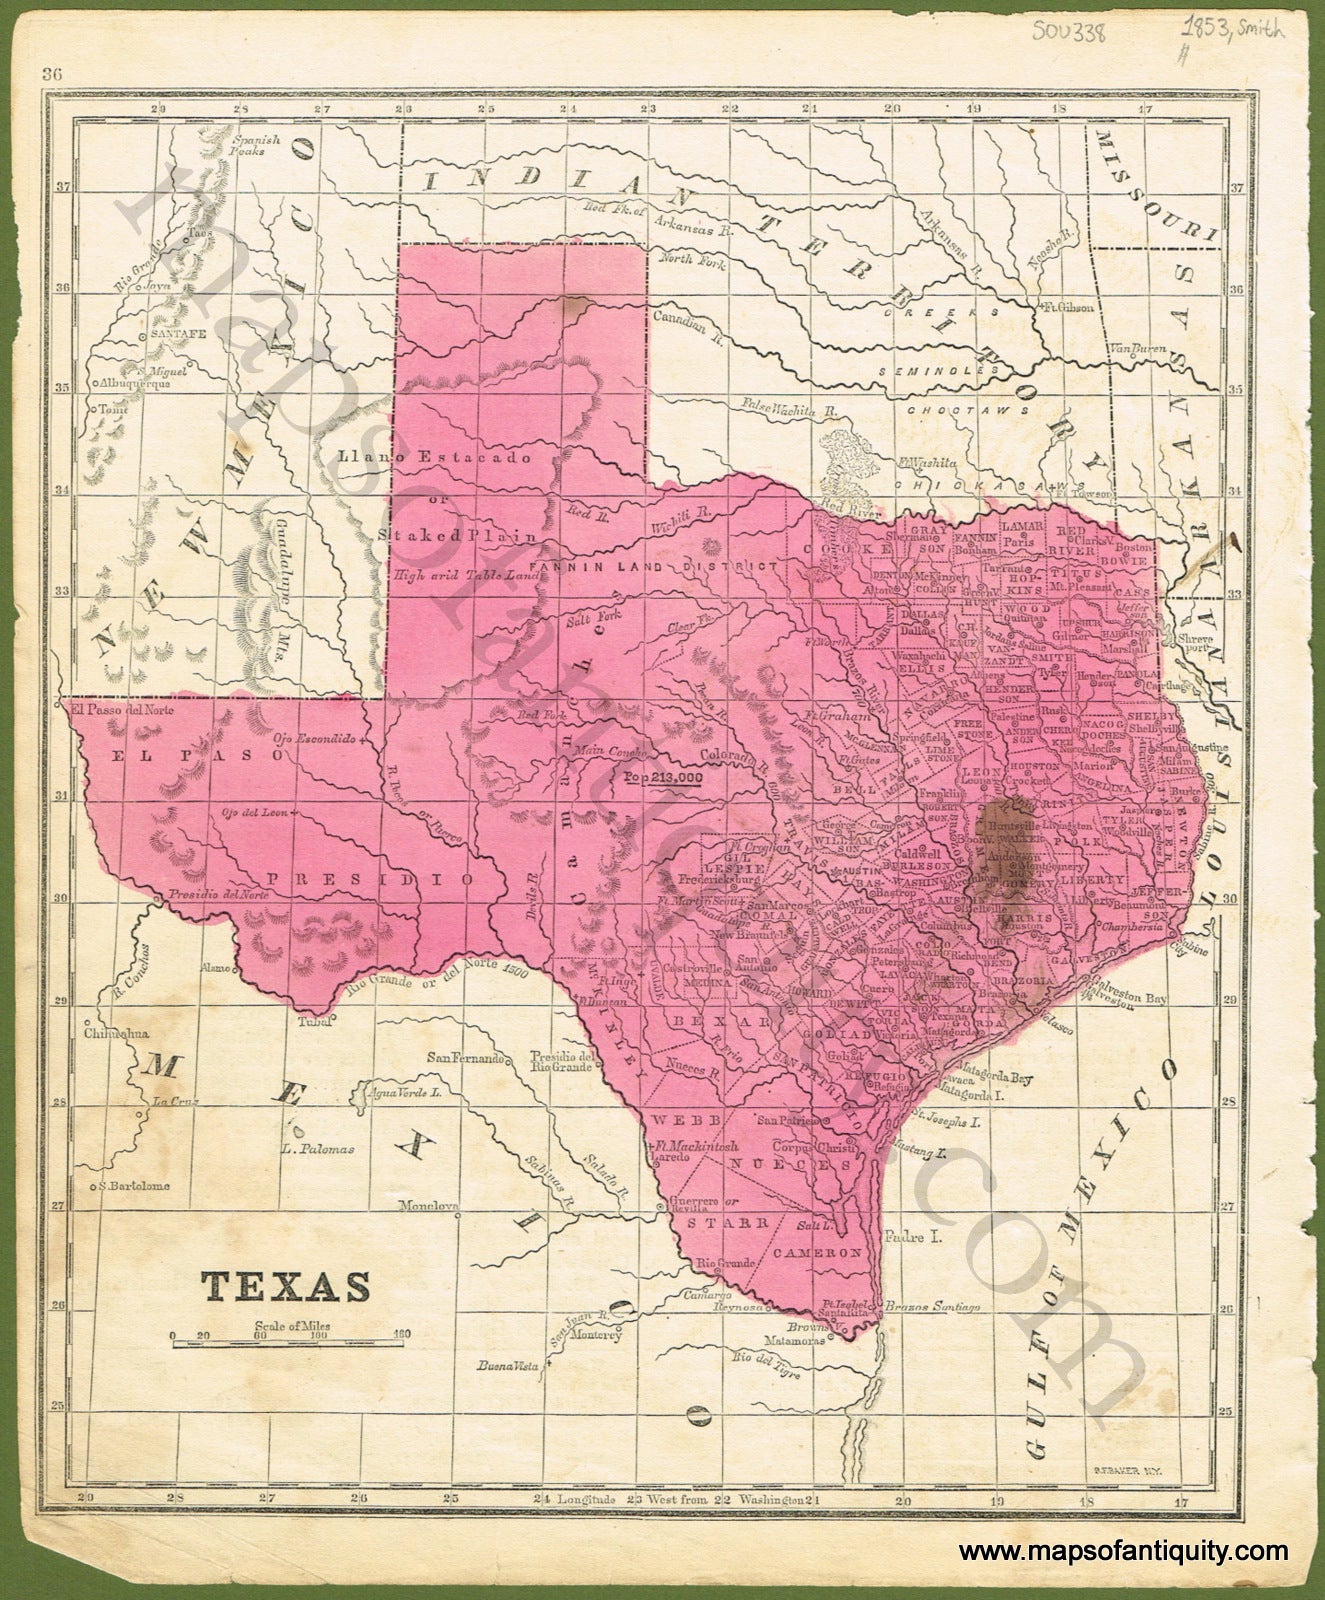 Antique-Hand-Colored-Map-Texas-**********-United-States-South-1853-Smith-Maps-Of-Antiquity